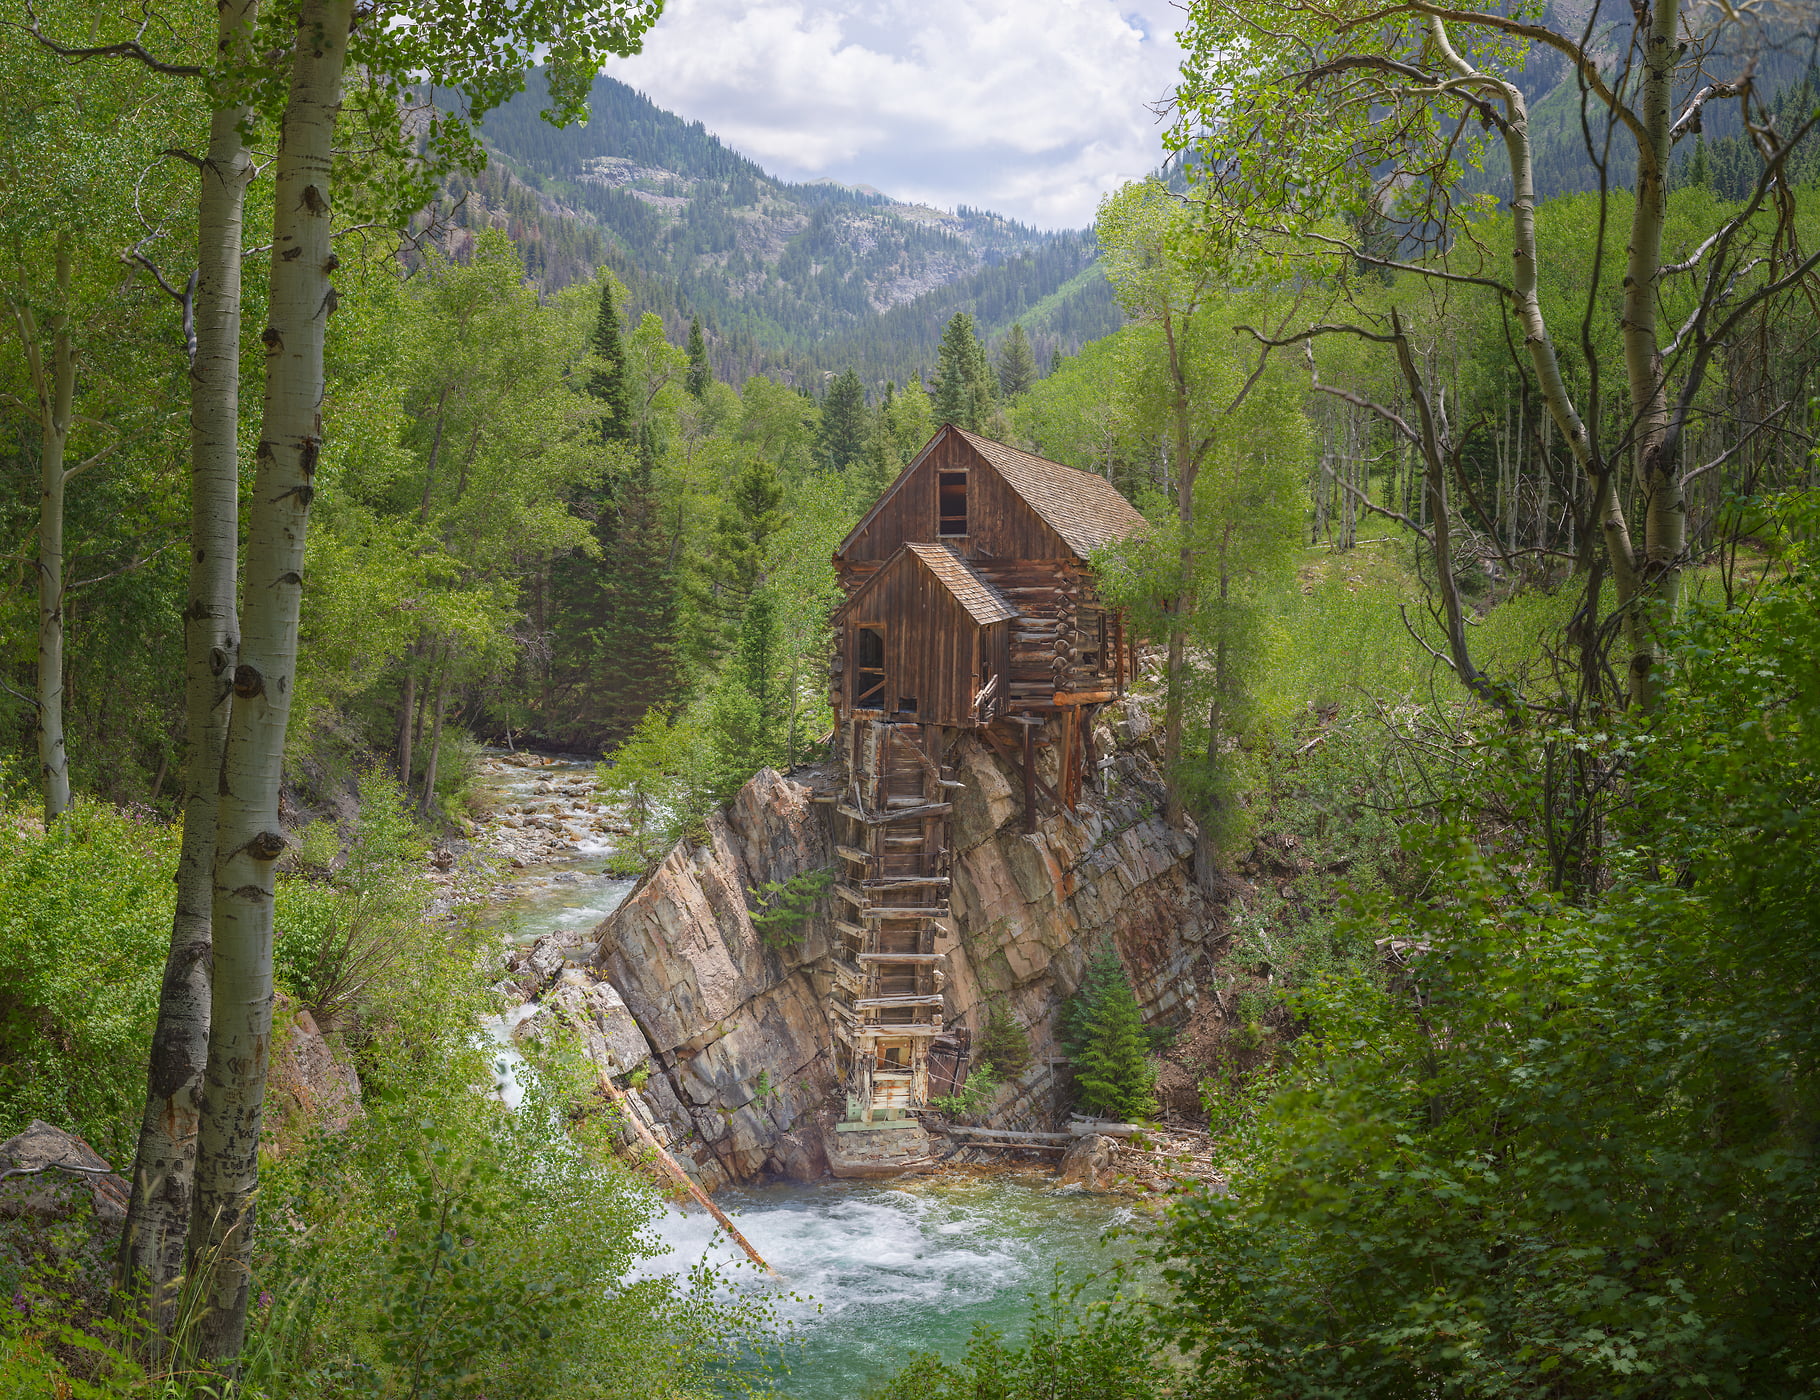 2,498 megapixels! A very high resolution, large-format VAST photo print of a rustic mill next to a stream in the woods; nature photograph created by John Freeman in Crystal Colorado